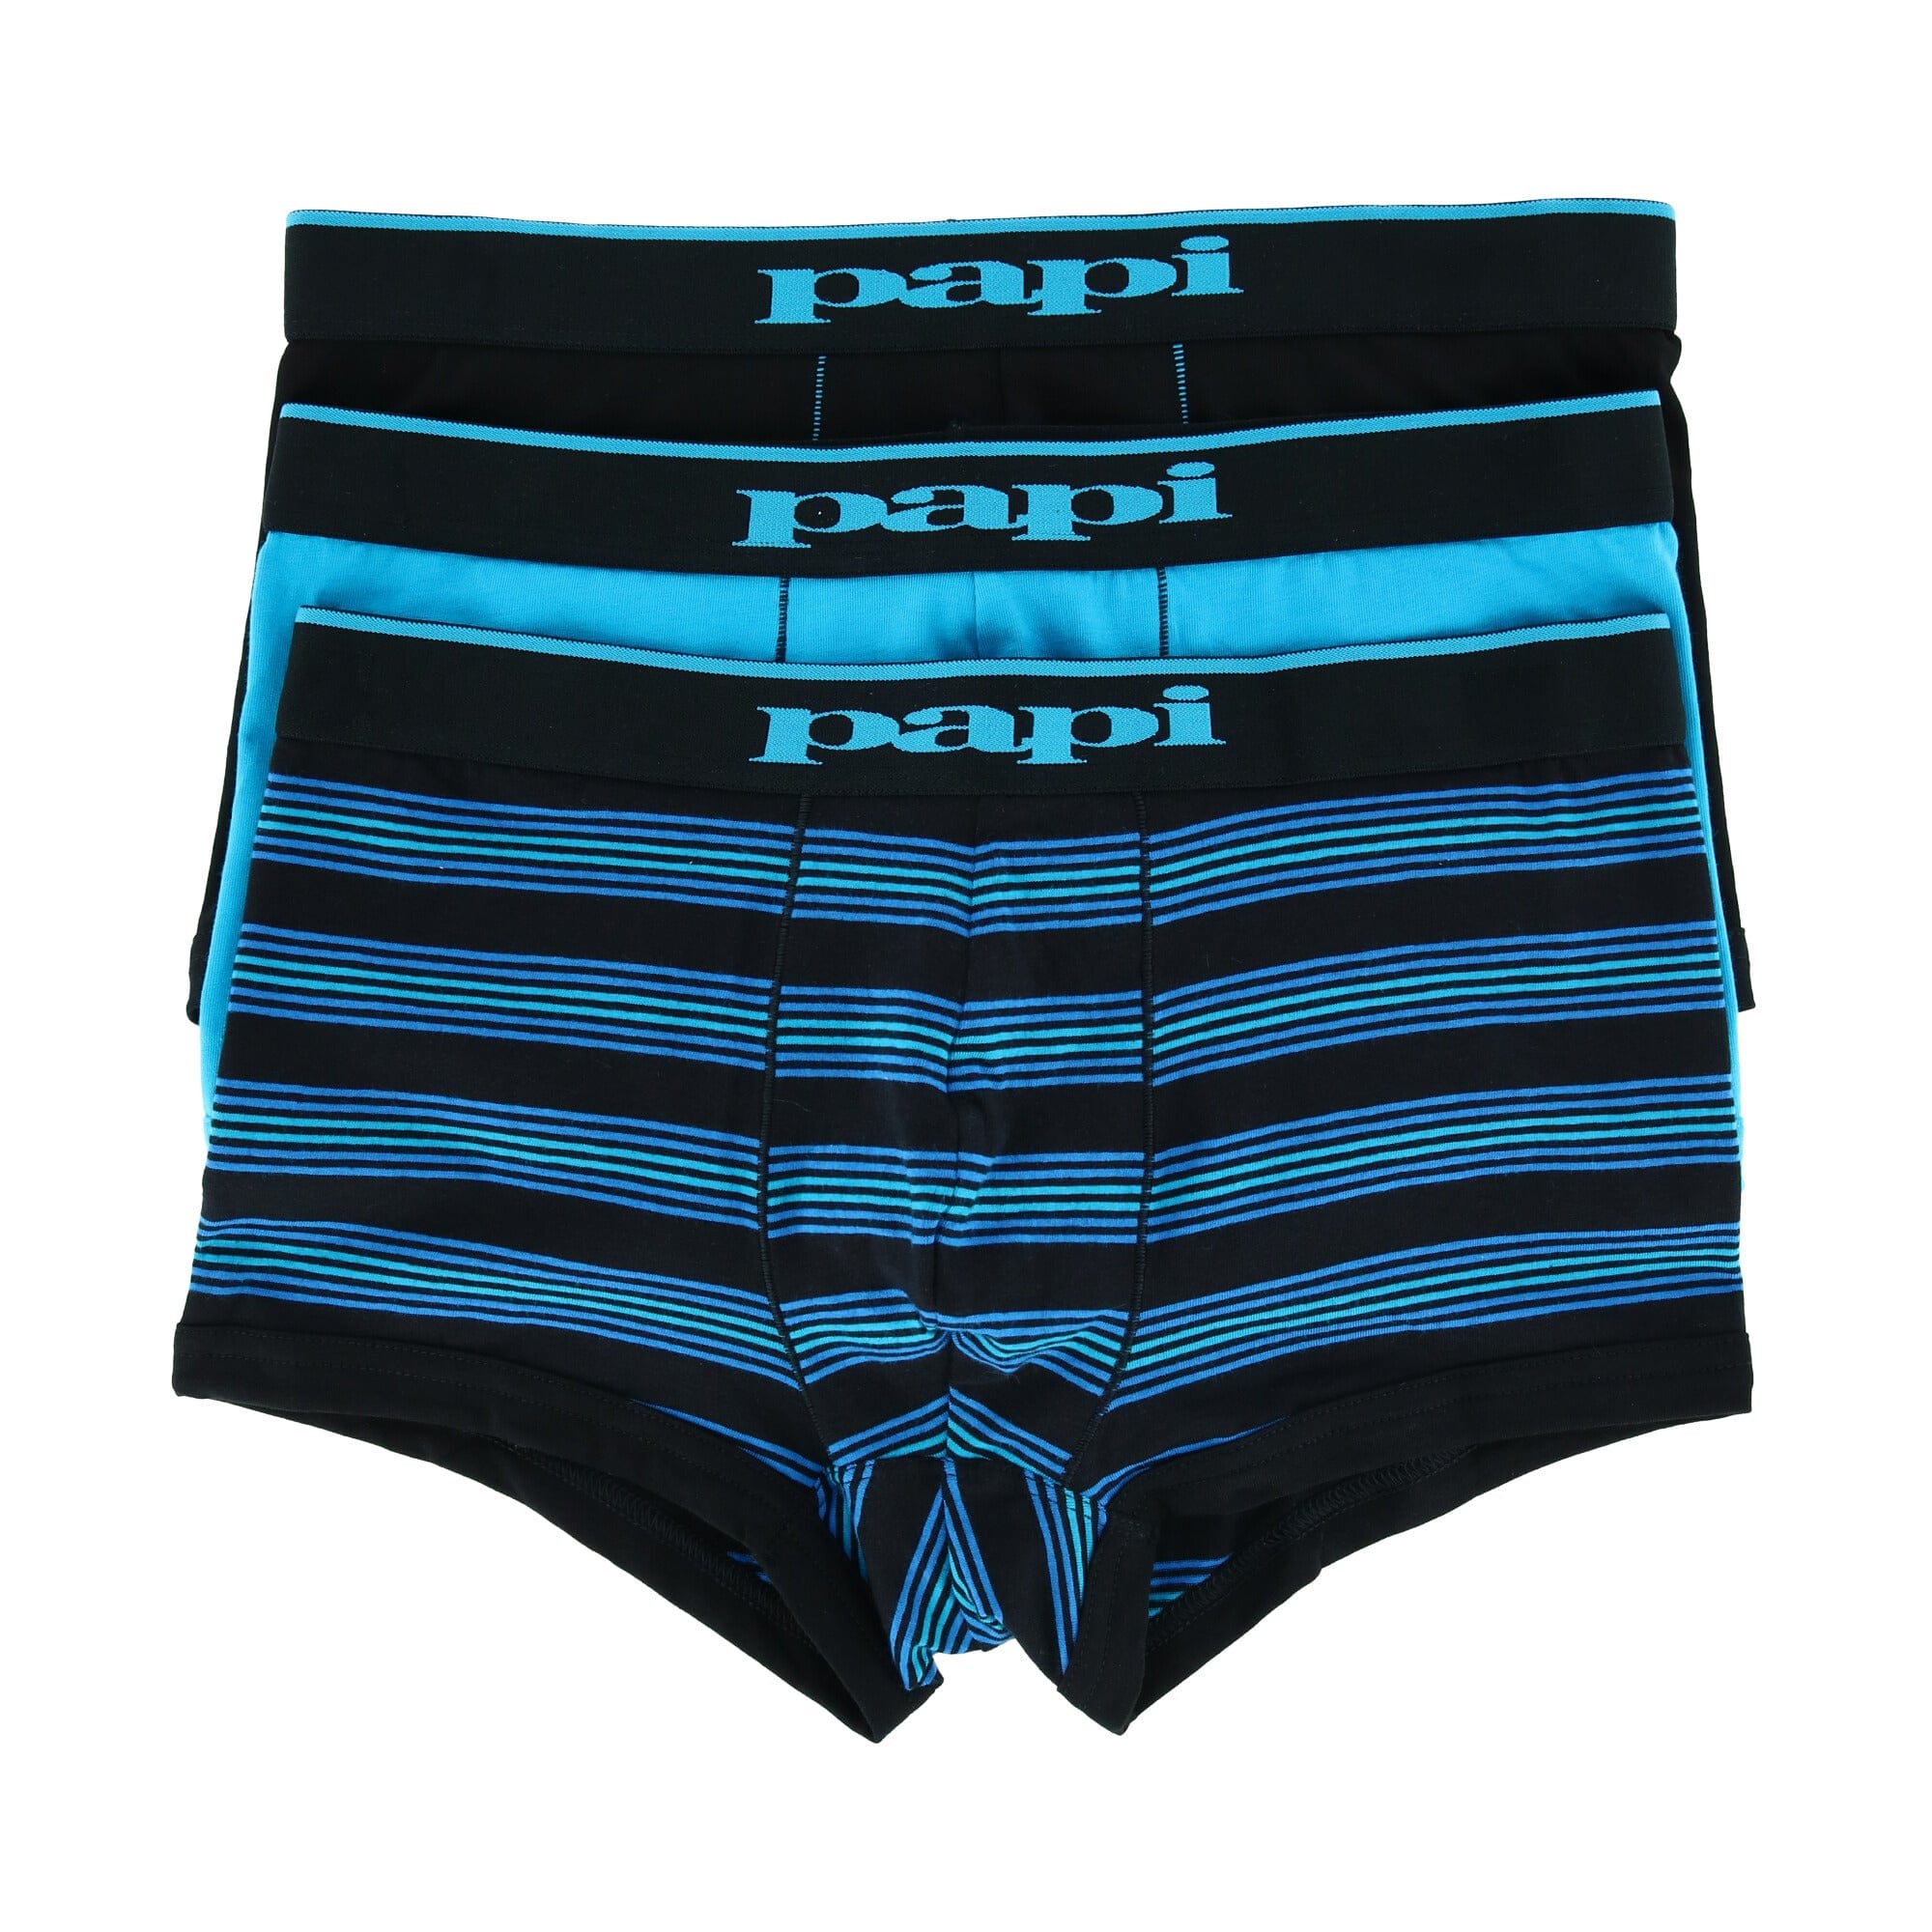 Men's Brazilian Cut Stripe and Solid Underwear Trunks (3 Pack) by Papi